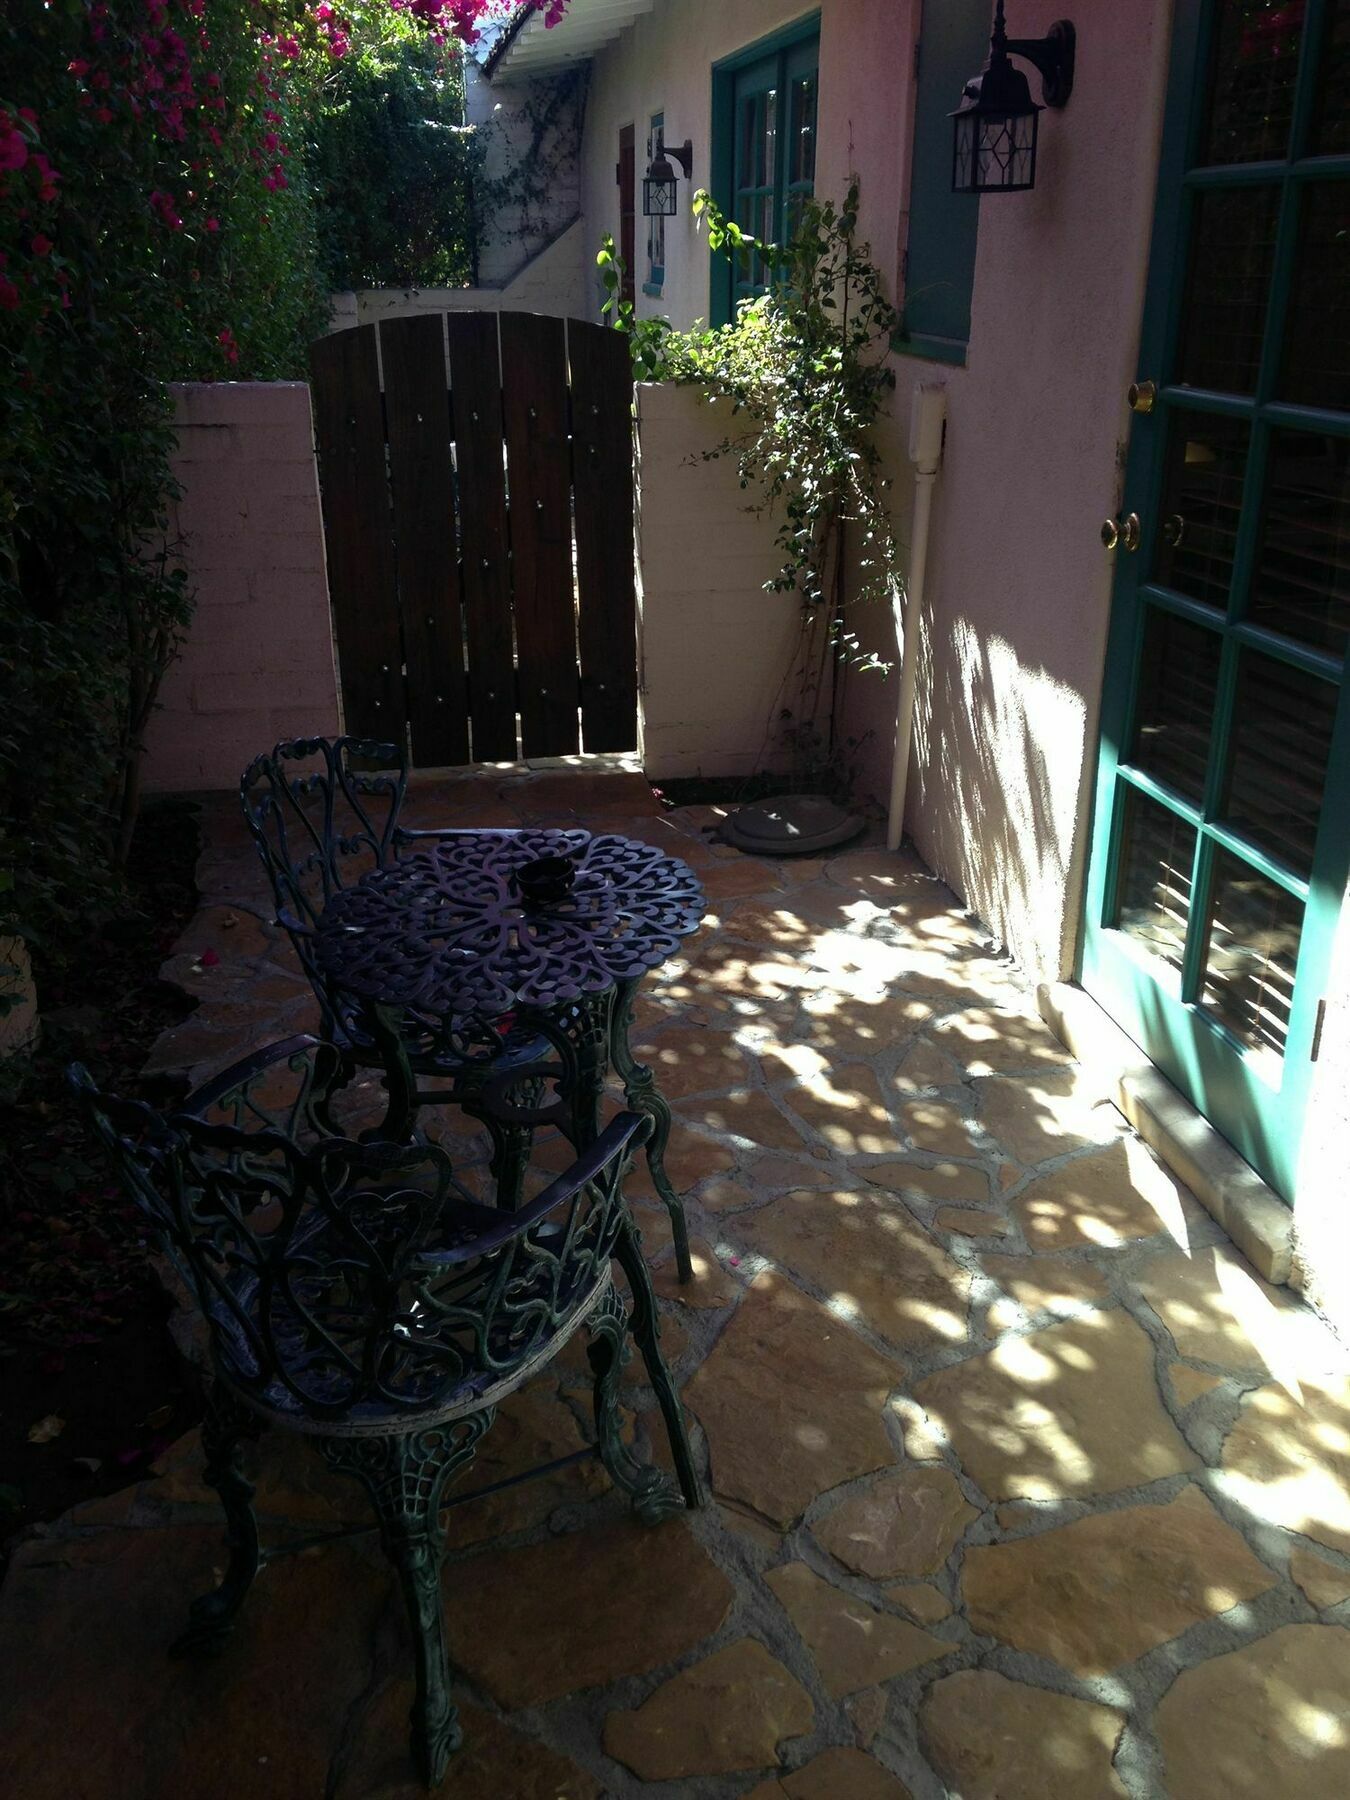 Casa Cody Bed & Breakfast Palm Springs Exterior photo